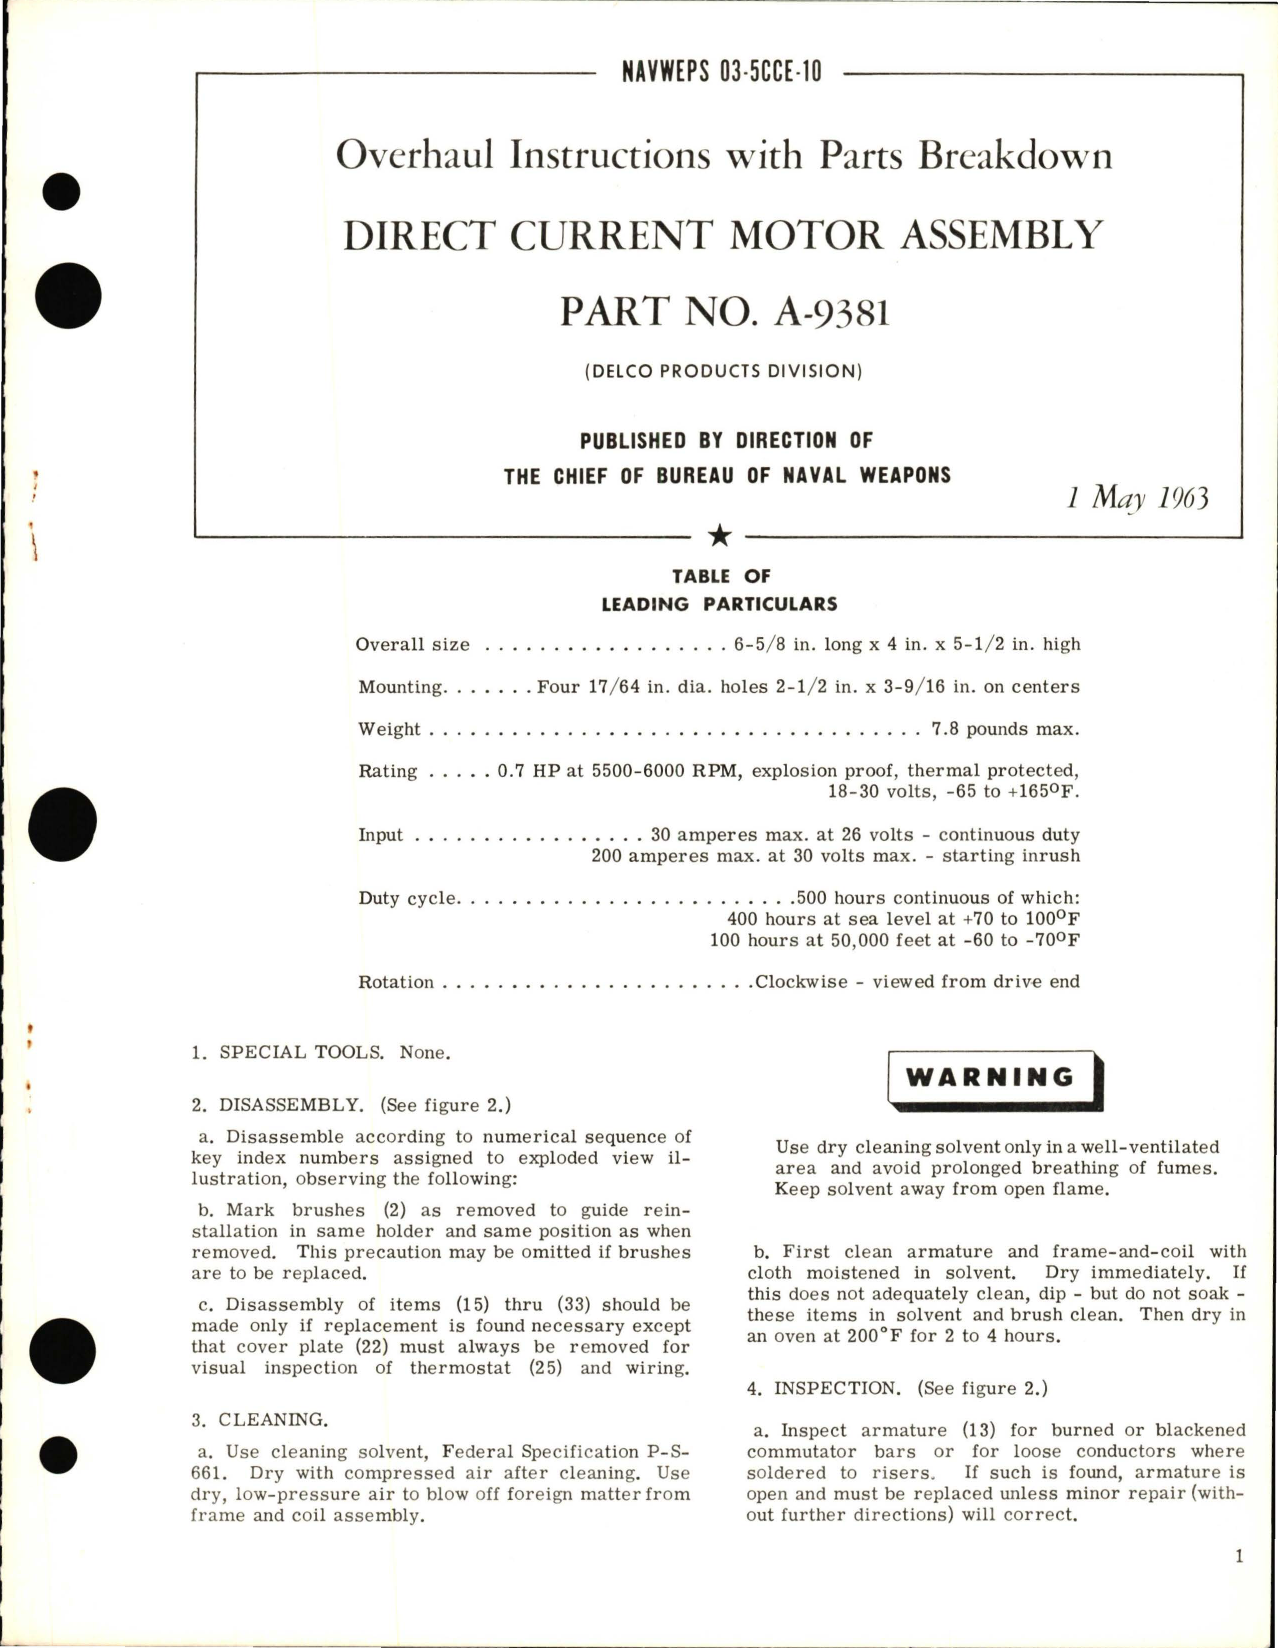 Sample page 1 from AirCorps Library document: Overhaul Instructions with Parts Breakdown for Direct Current Motor Assembly - Part A-9381